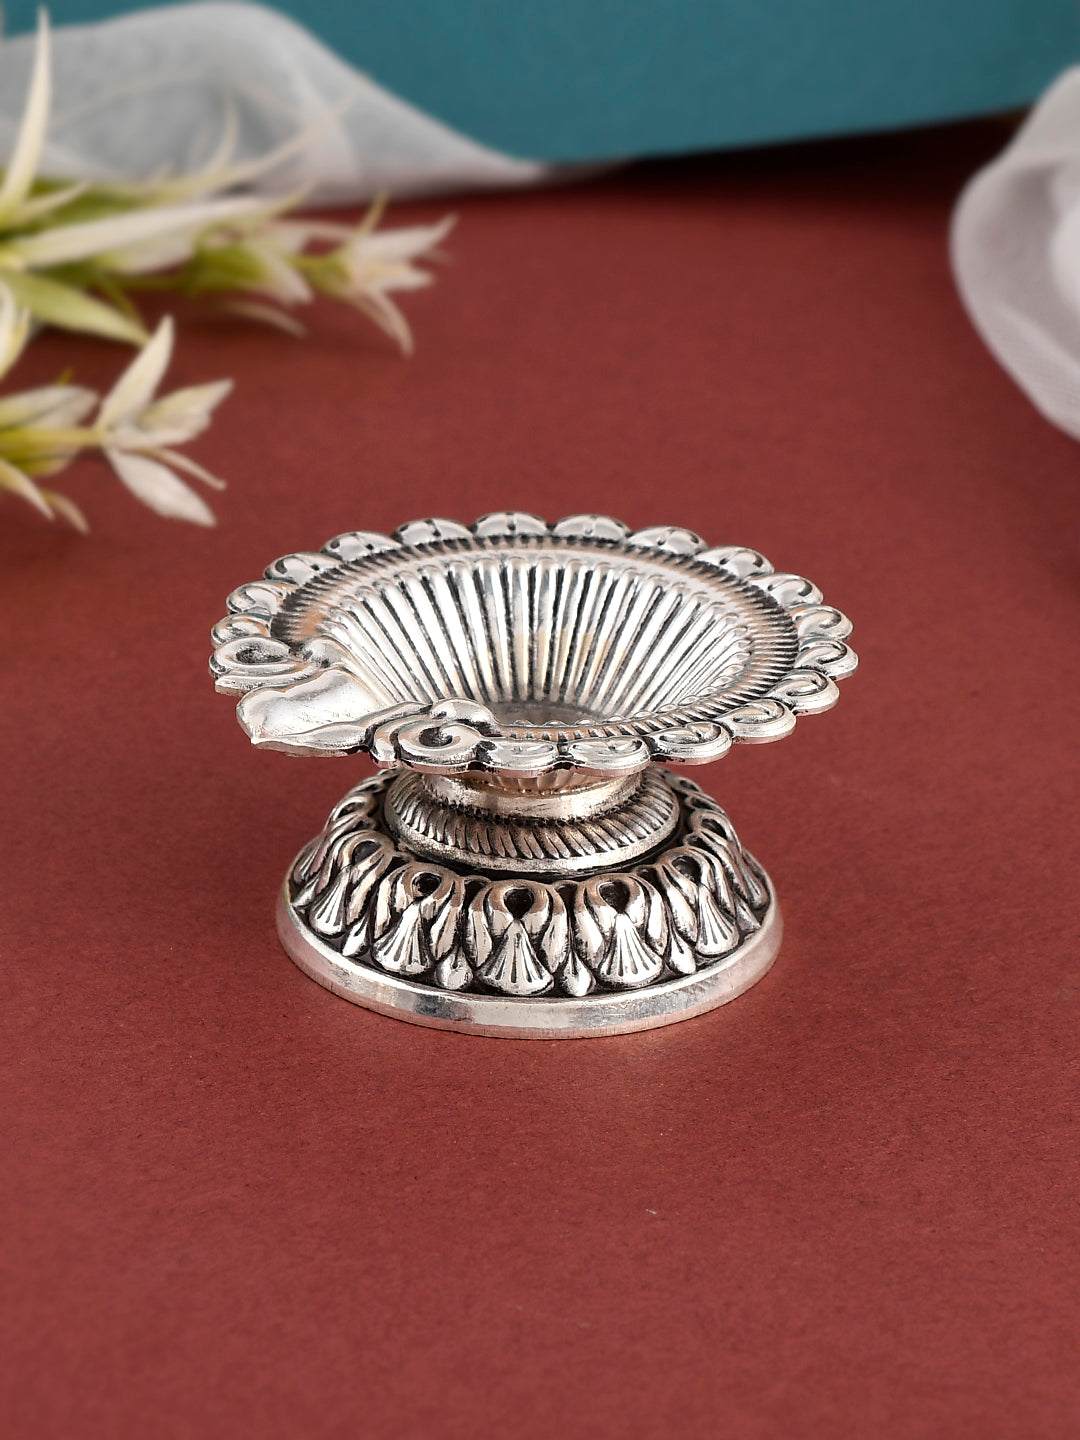 German Silver Gifts - Exclusive collection of gifts by Wedtree